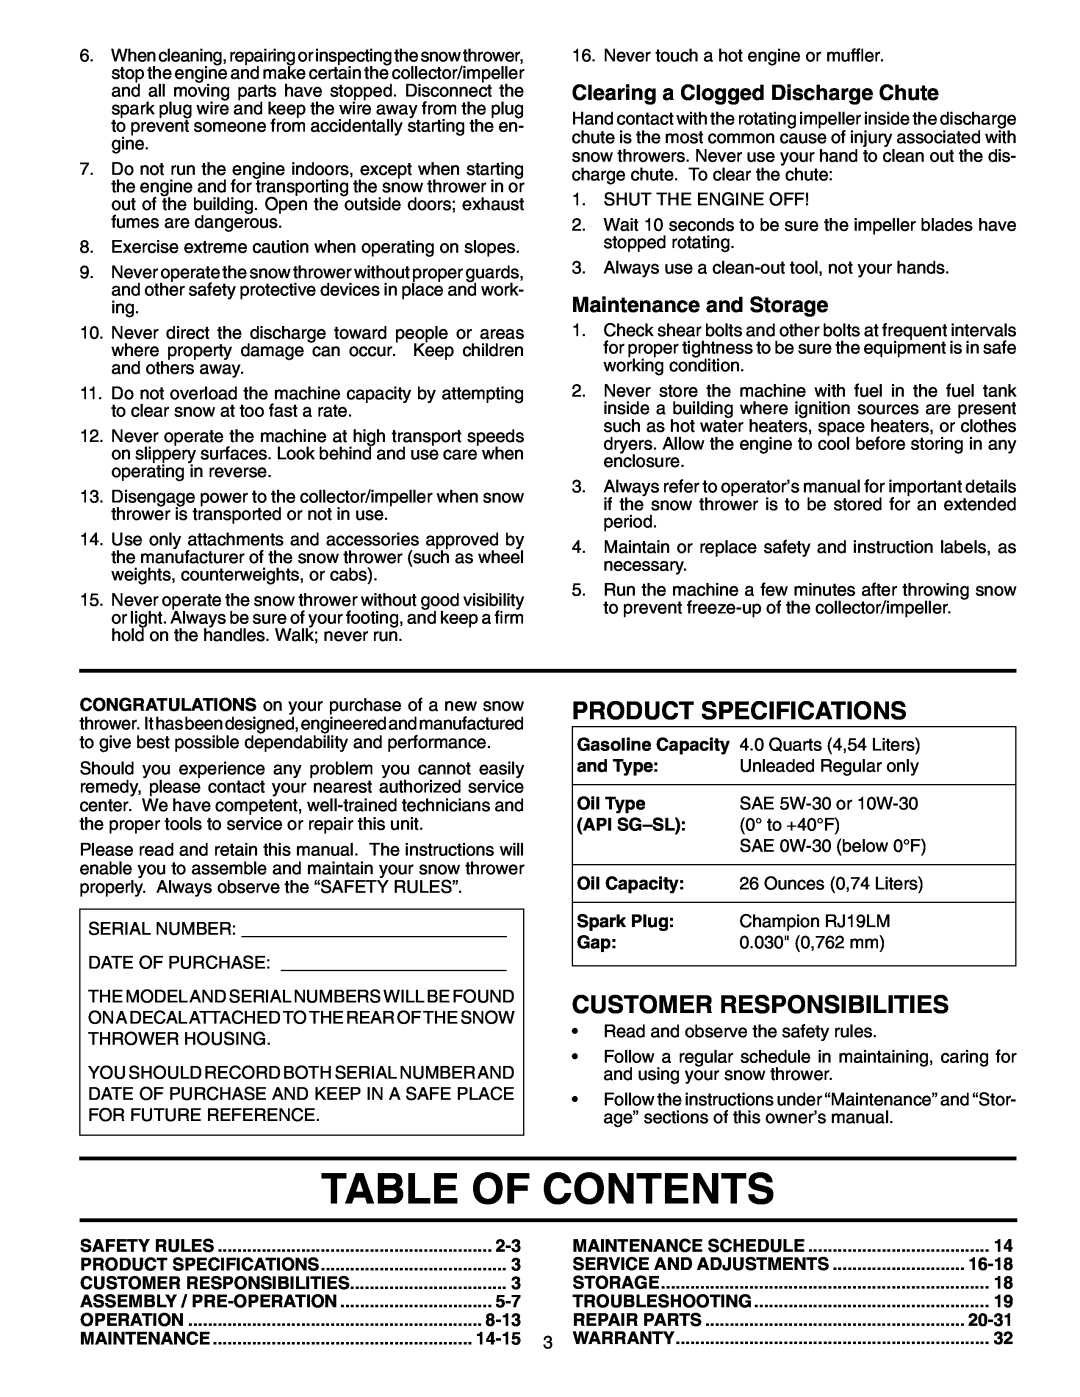 Poulan 199600 Table Of Contents, Clearing a Clogged Discharge Chute, Maintenance and Storage, Product Specifications 